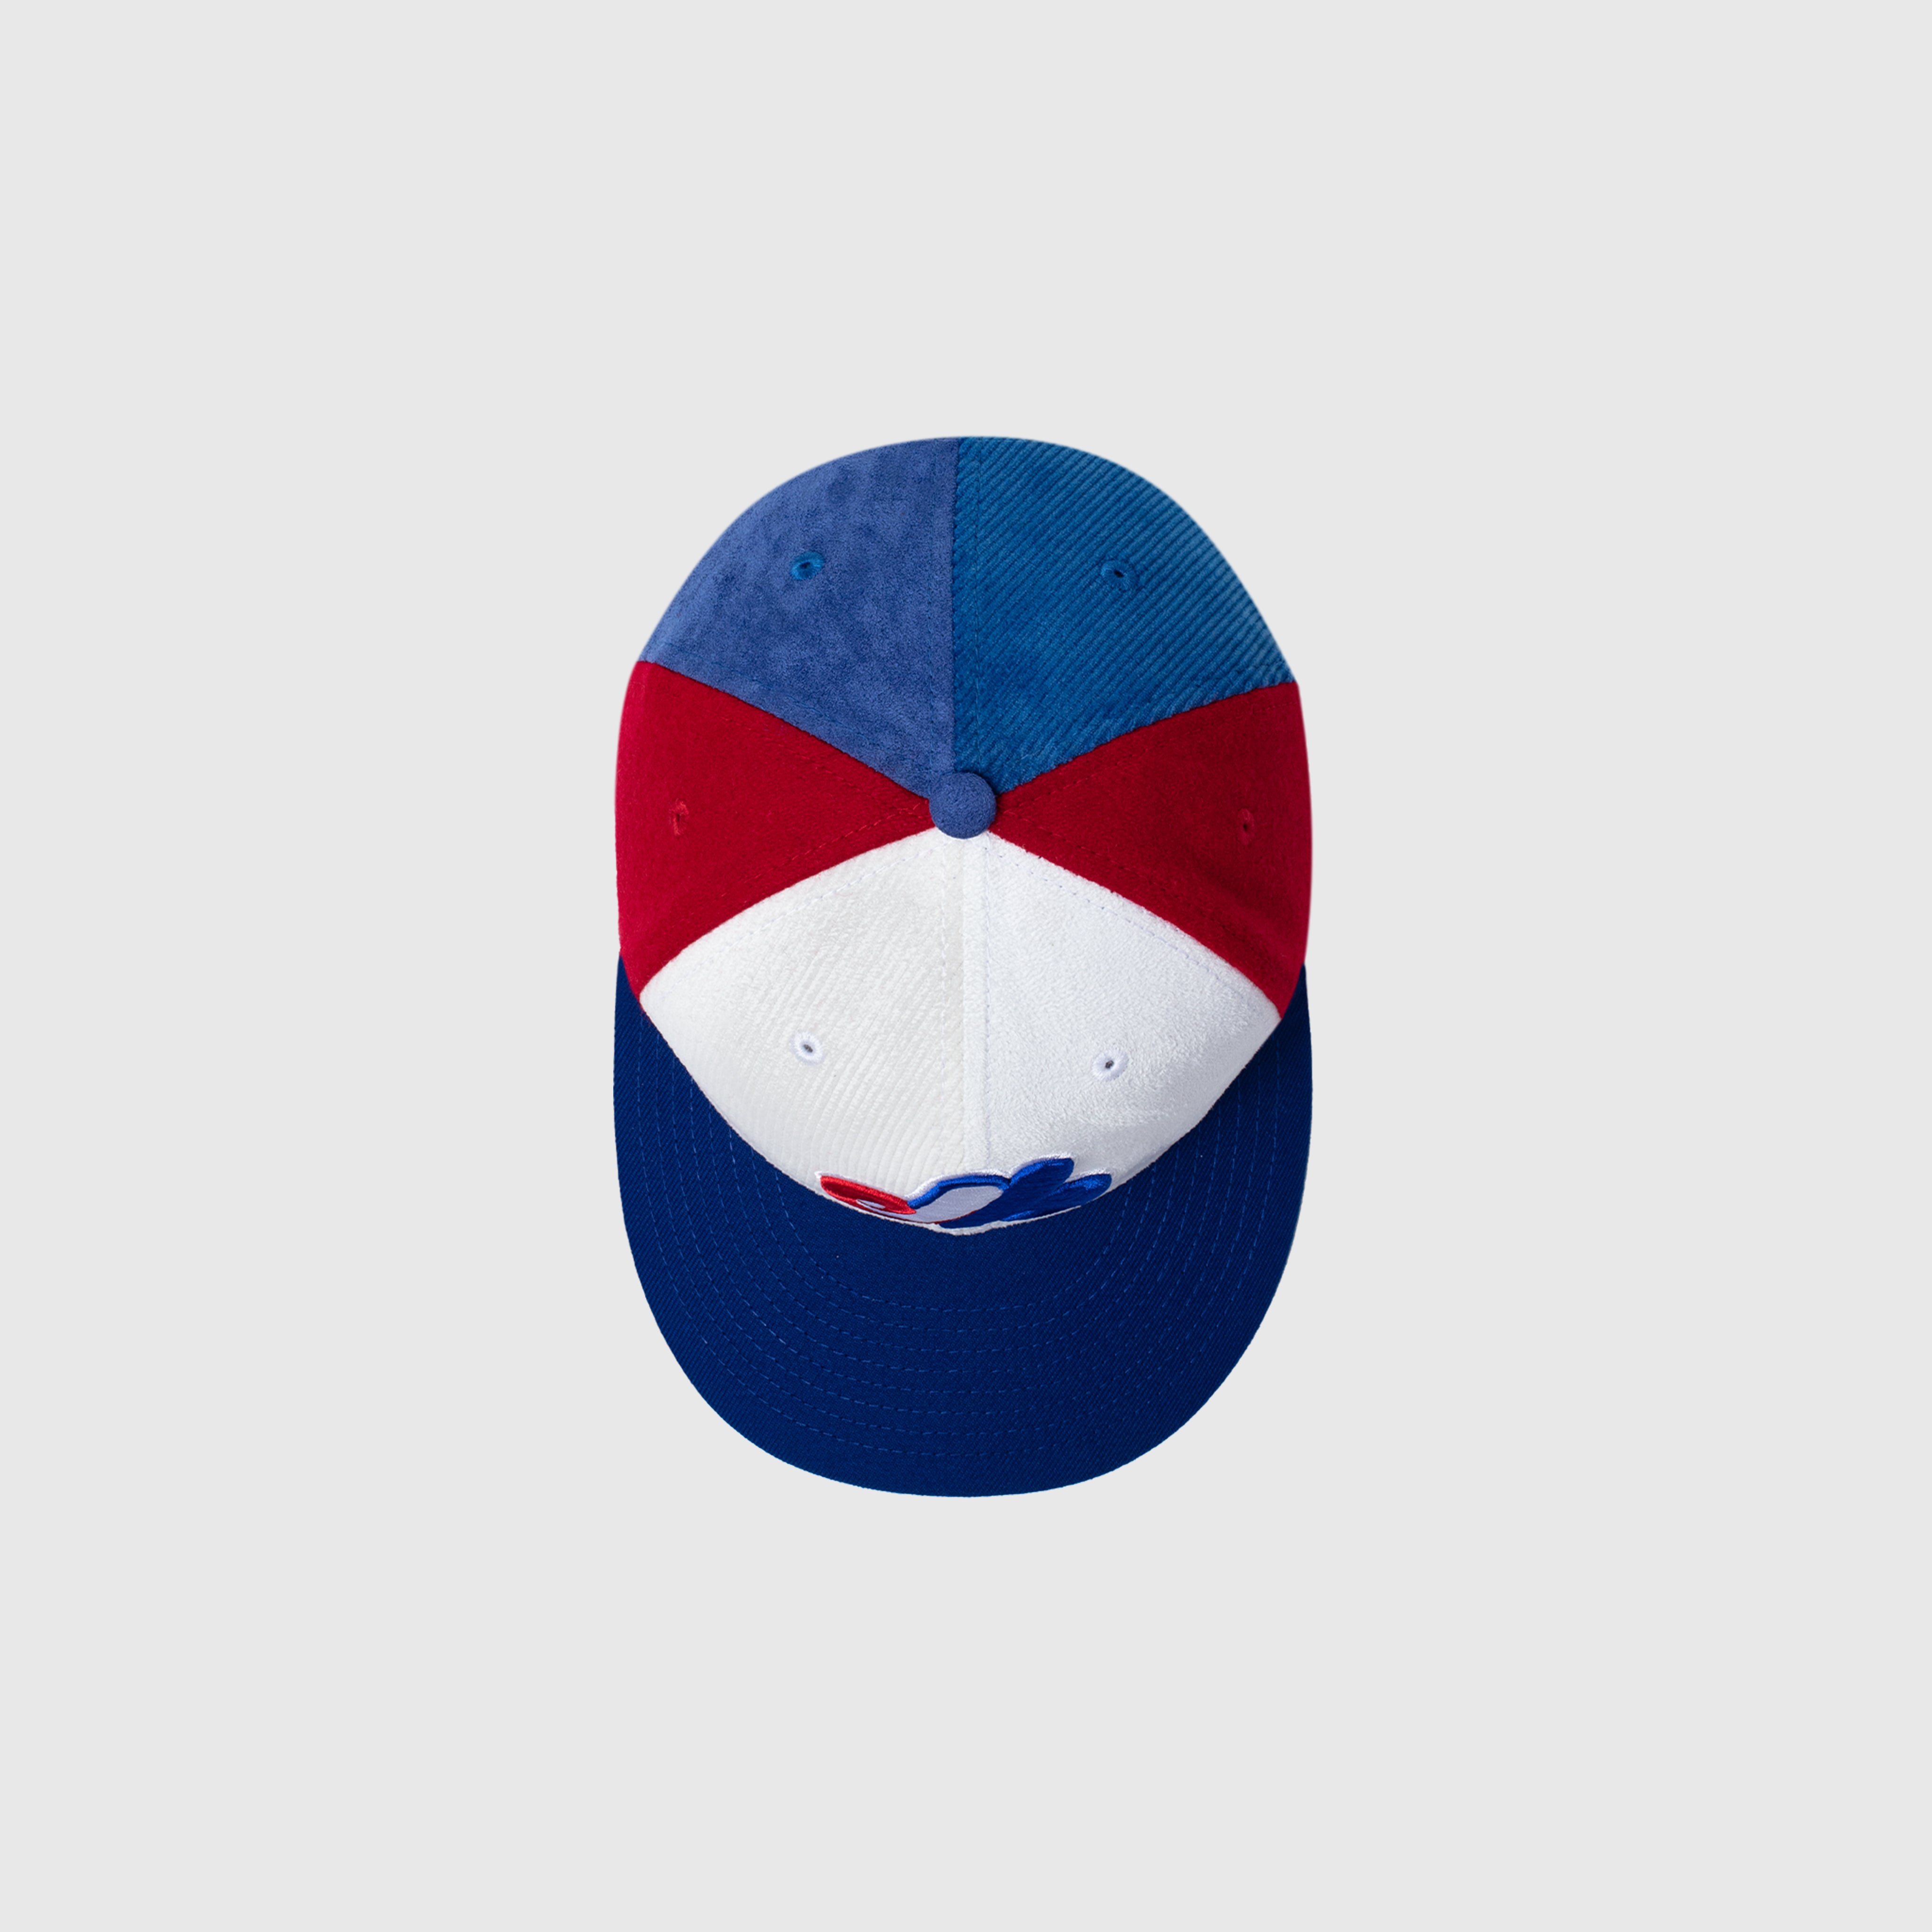 AnthonyantonellisShops X NEW ERA MONTREAL EXPOS 59FIFTY FITTED "PATCHWORK"